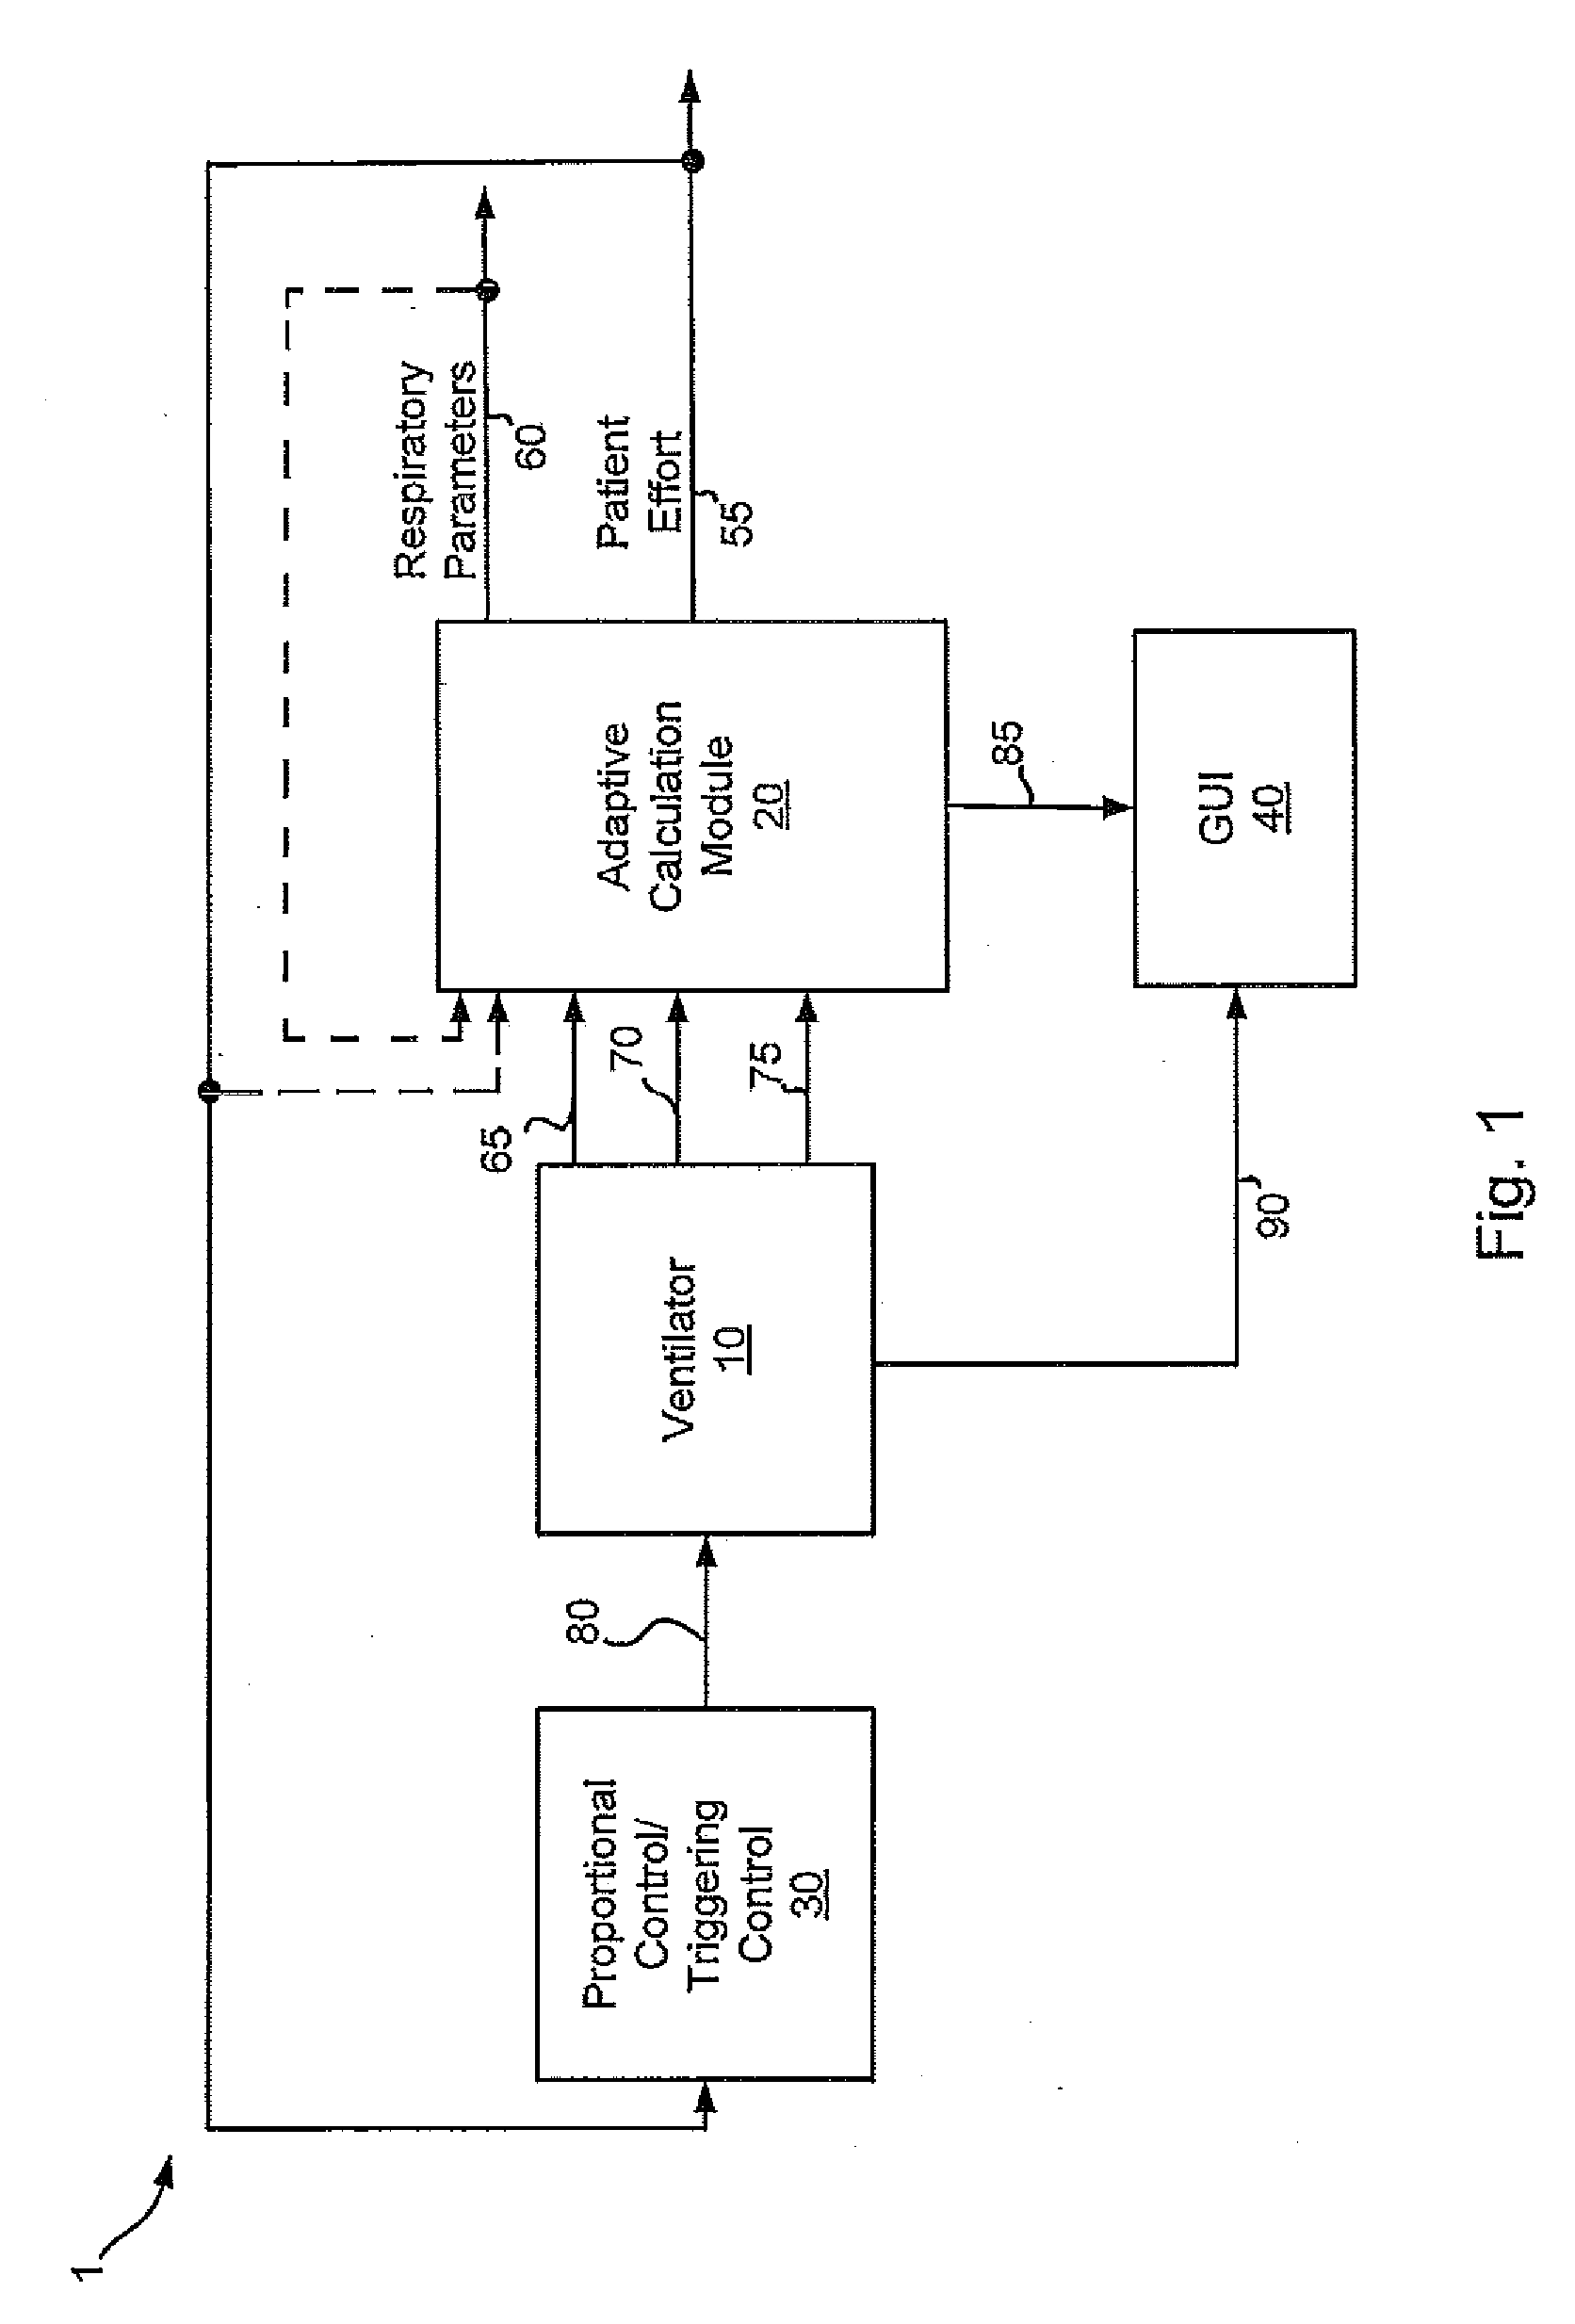 Systems and methods for determining patient effort and/or respiratory parameters in a ventilation system